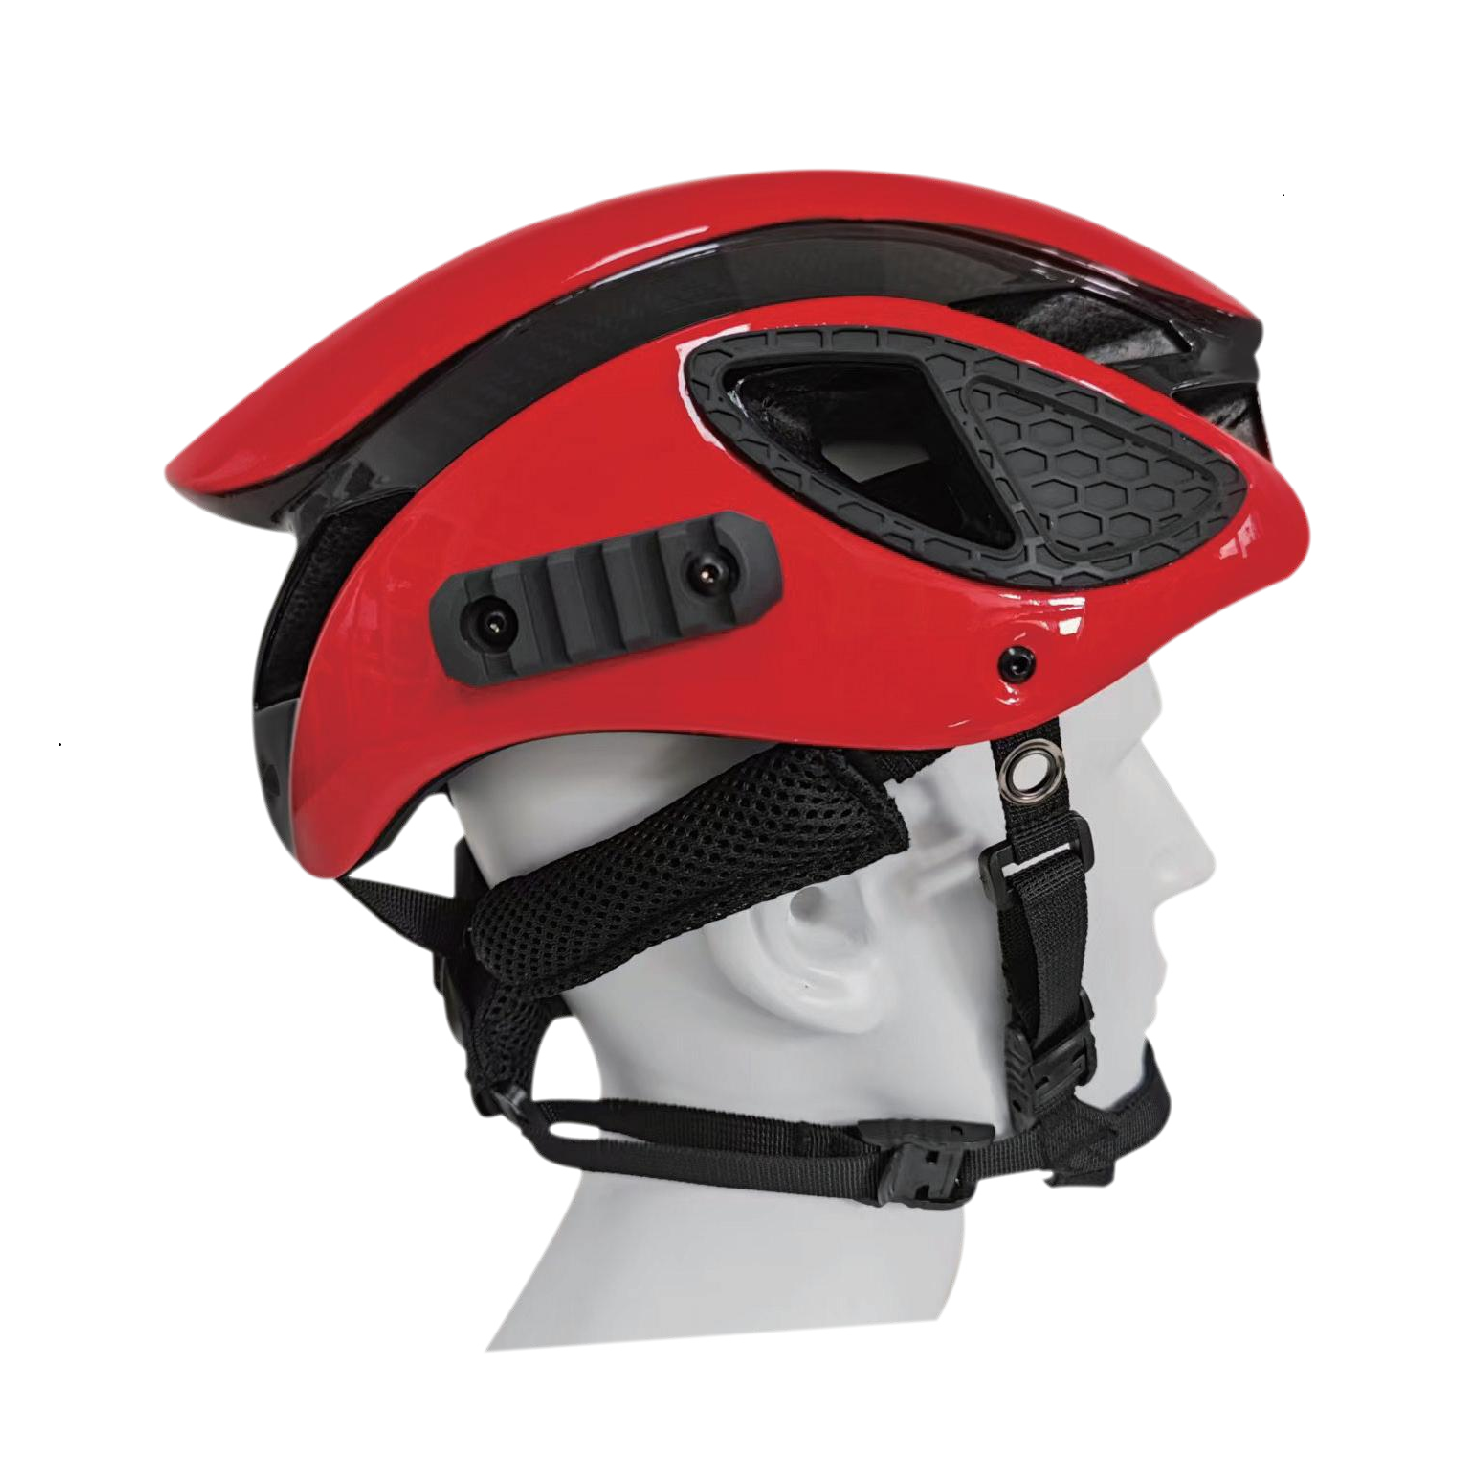 Cycling Intercom Helmet with Voice Control and Position